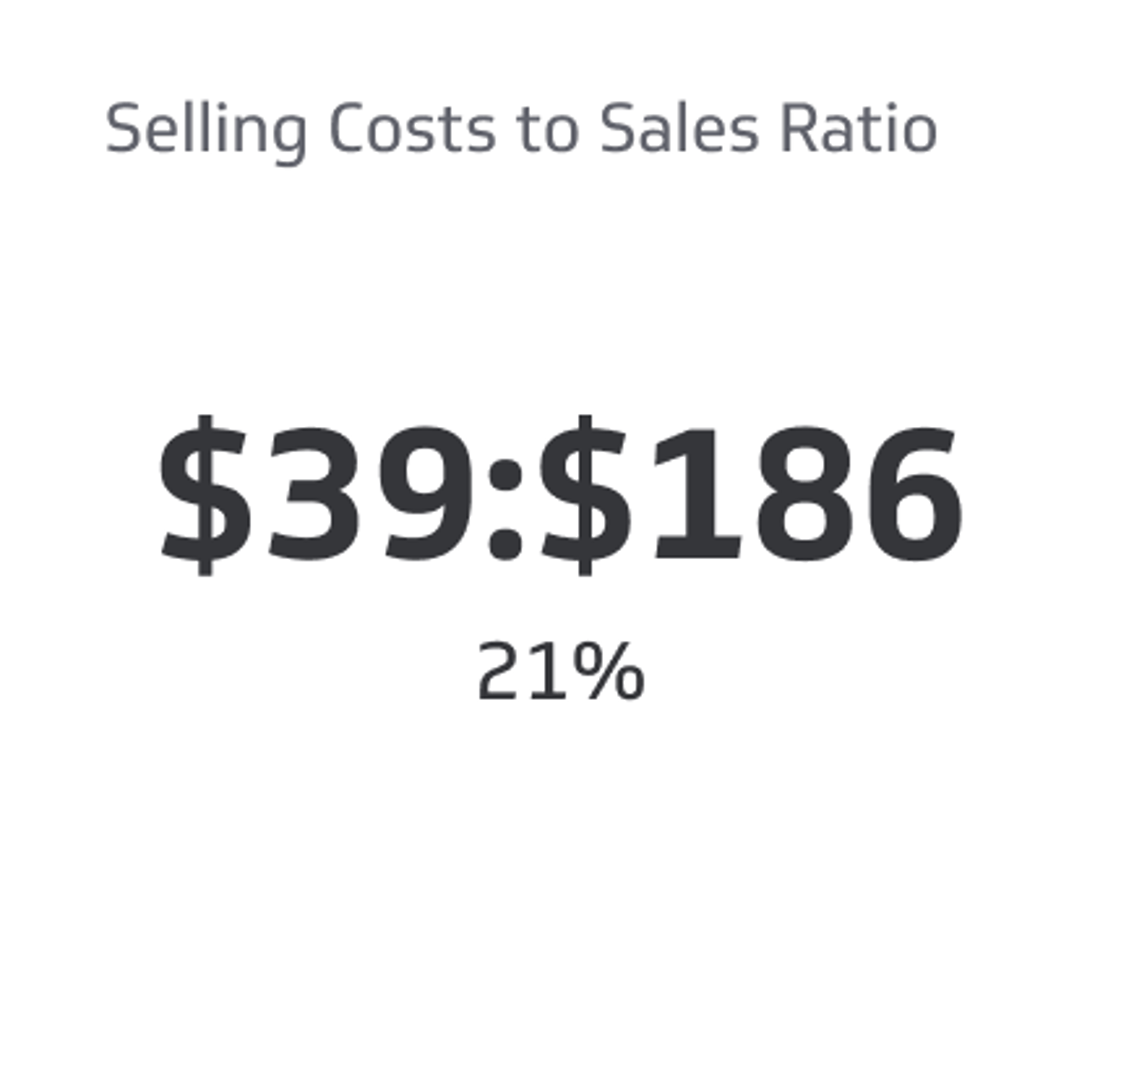 Sales KPI Example - Selling Costs to Sales Ratio Metric